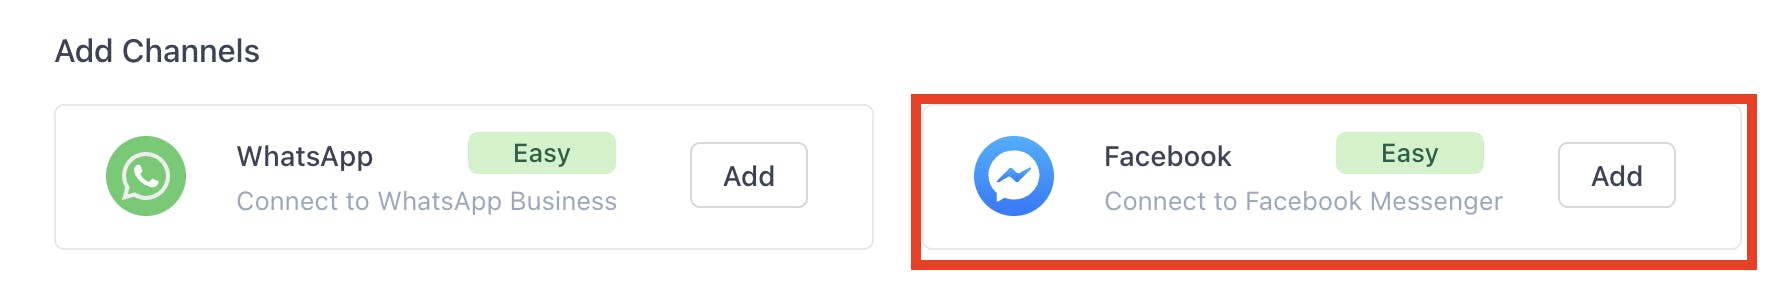 how to connect Facebook Messenger to SleekFlow 1